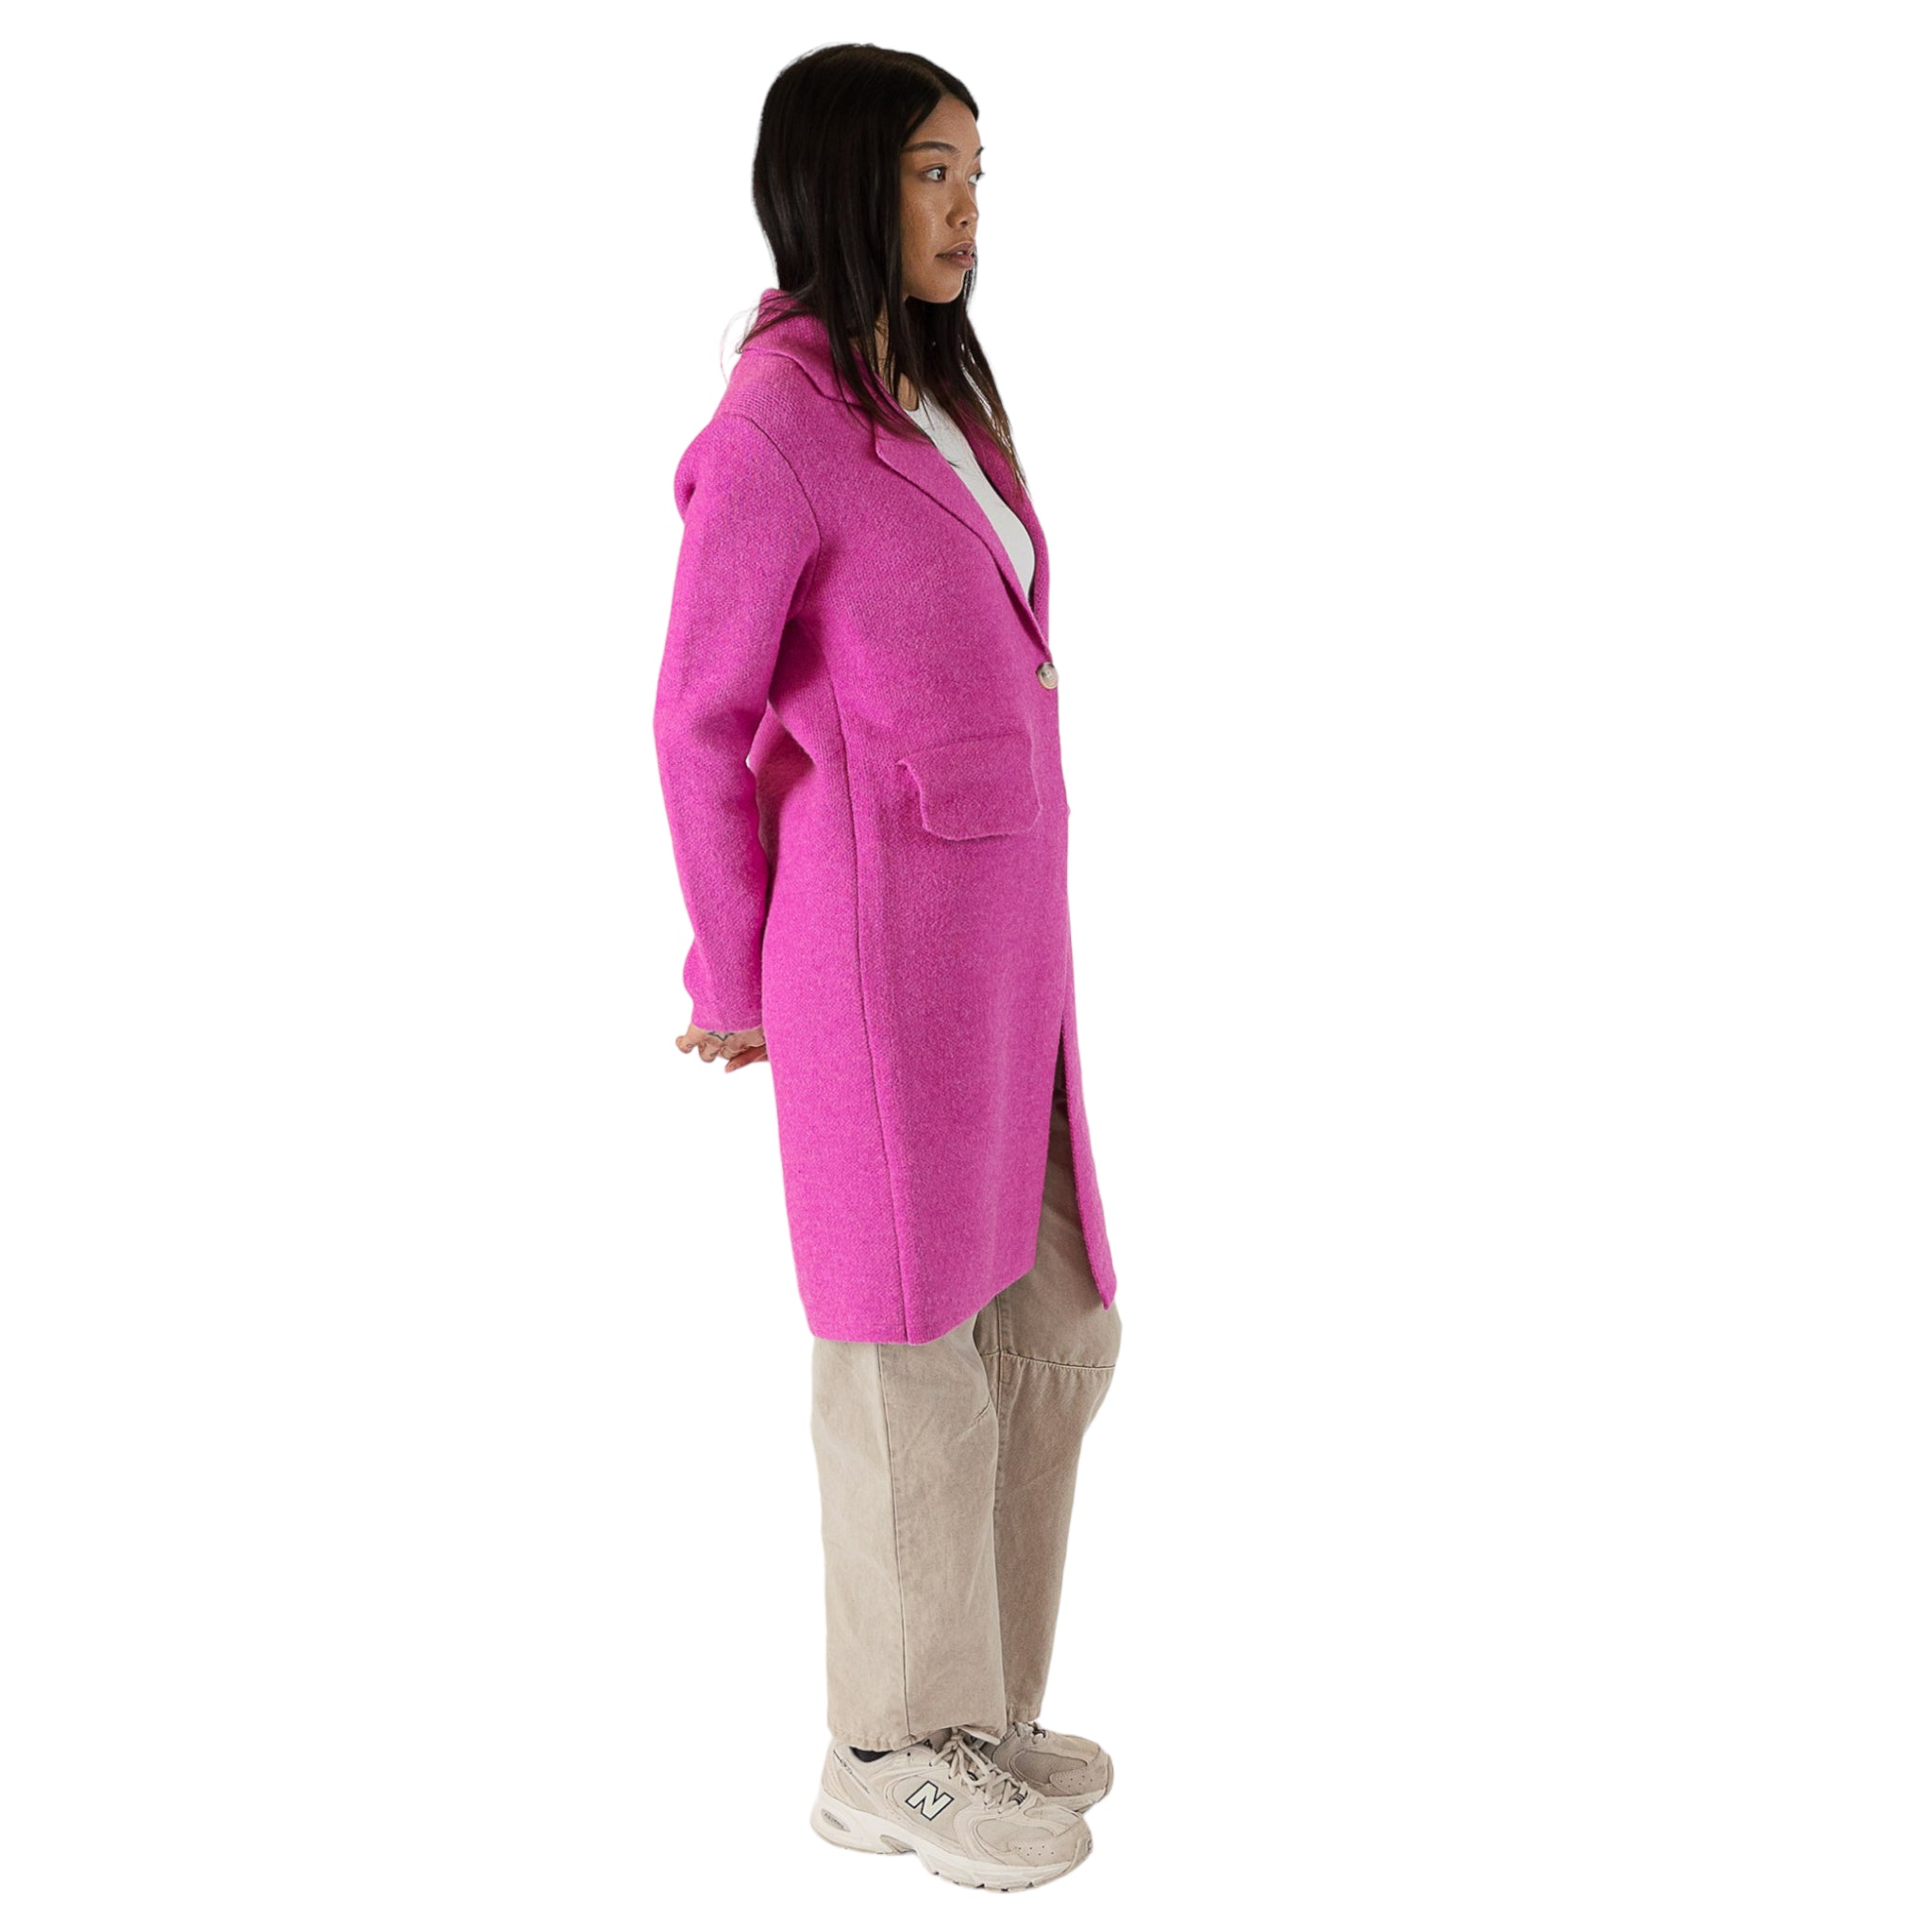 Fiona Collared Jacket Sweater with Pockets in Magenta-Veri Peri